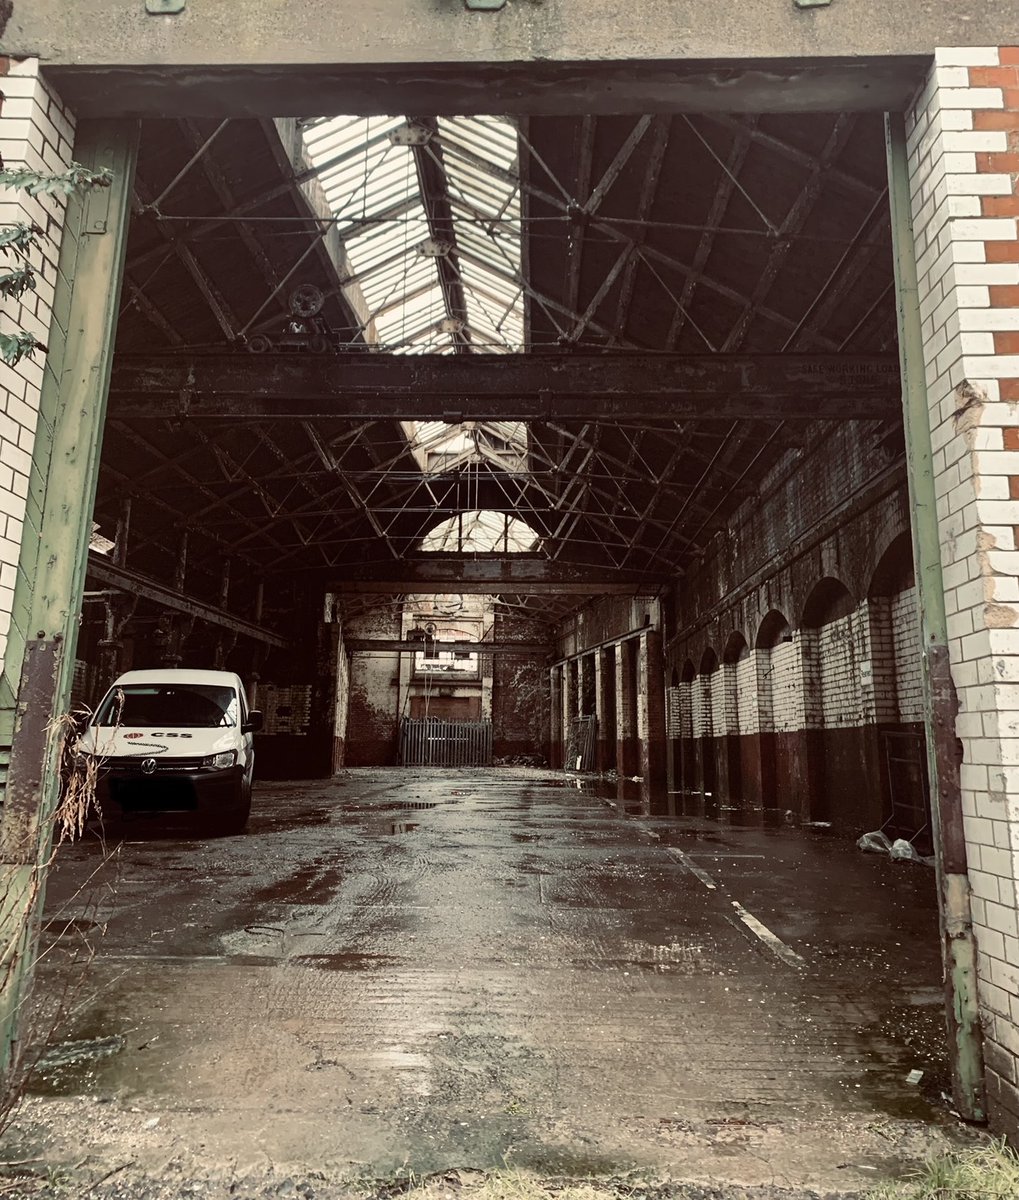 This is the site today (credit  @maevemonaghan): one can still see the original trusses and some of the industrial architecture. Kept behind rolled shutters, it is a rare sight. What will be the future of Belfast's first electric power station? /end